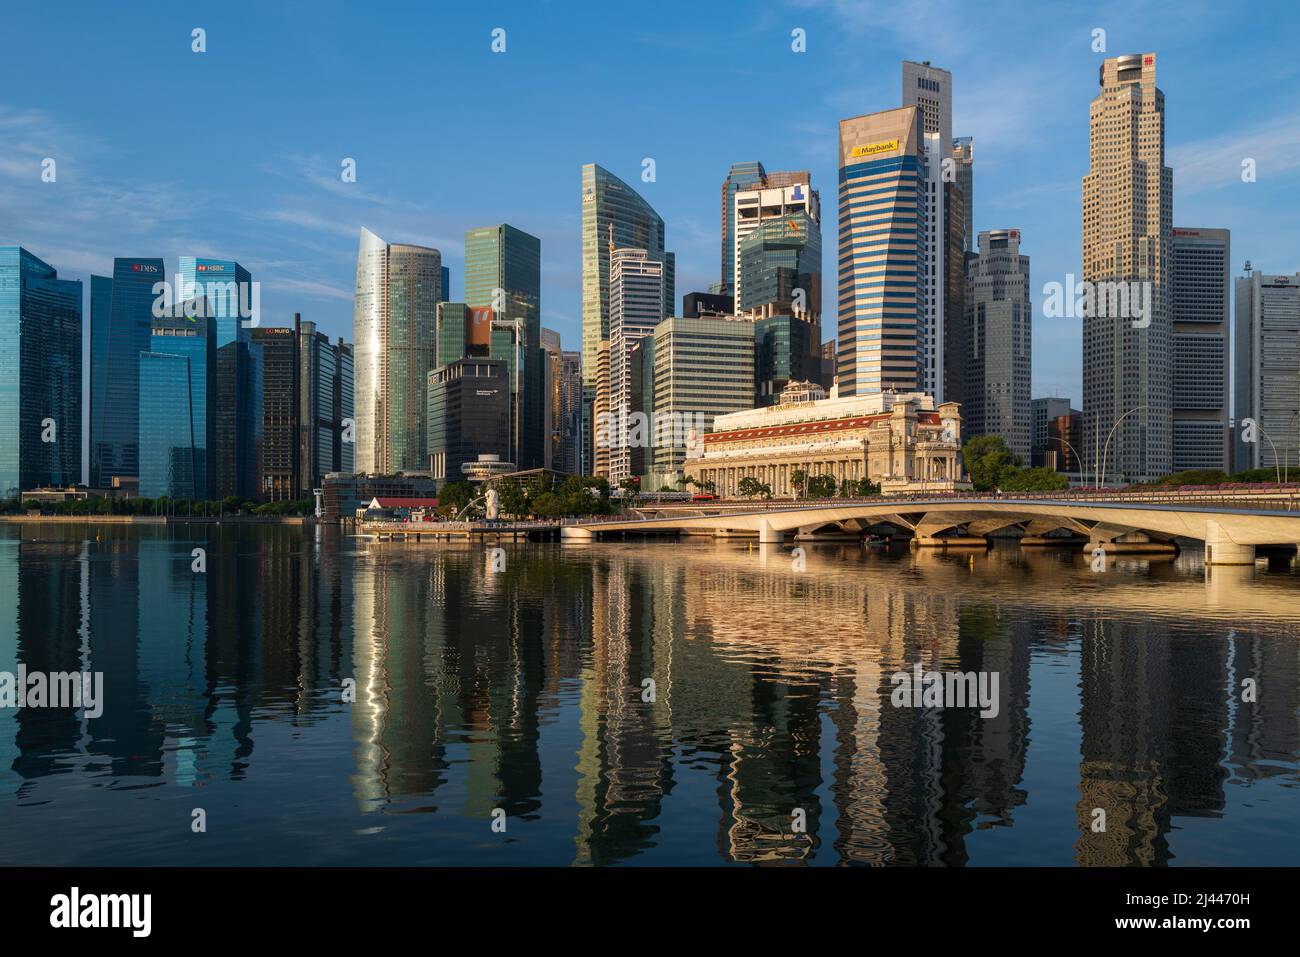 The Singapore Skyline with the iconic Fullerton Hotel set against a backdrop of the office buildings in the Central Business District of the city. Stock Photo